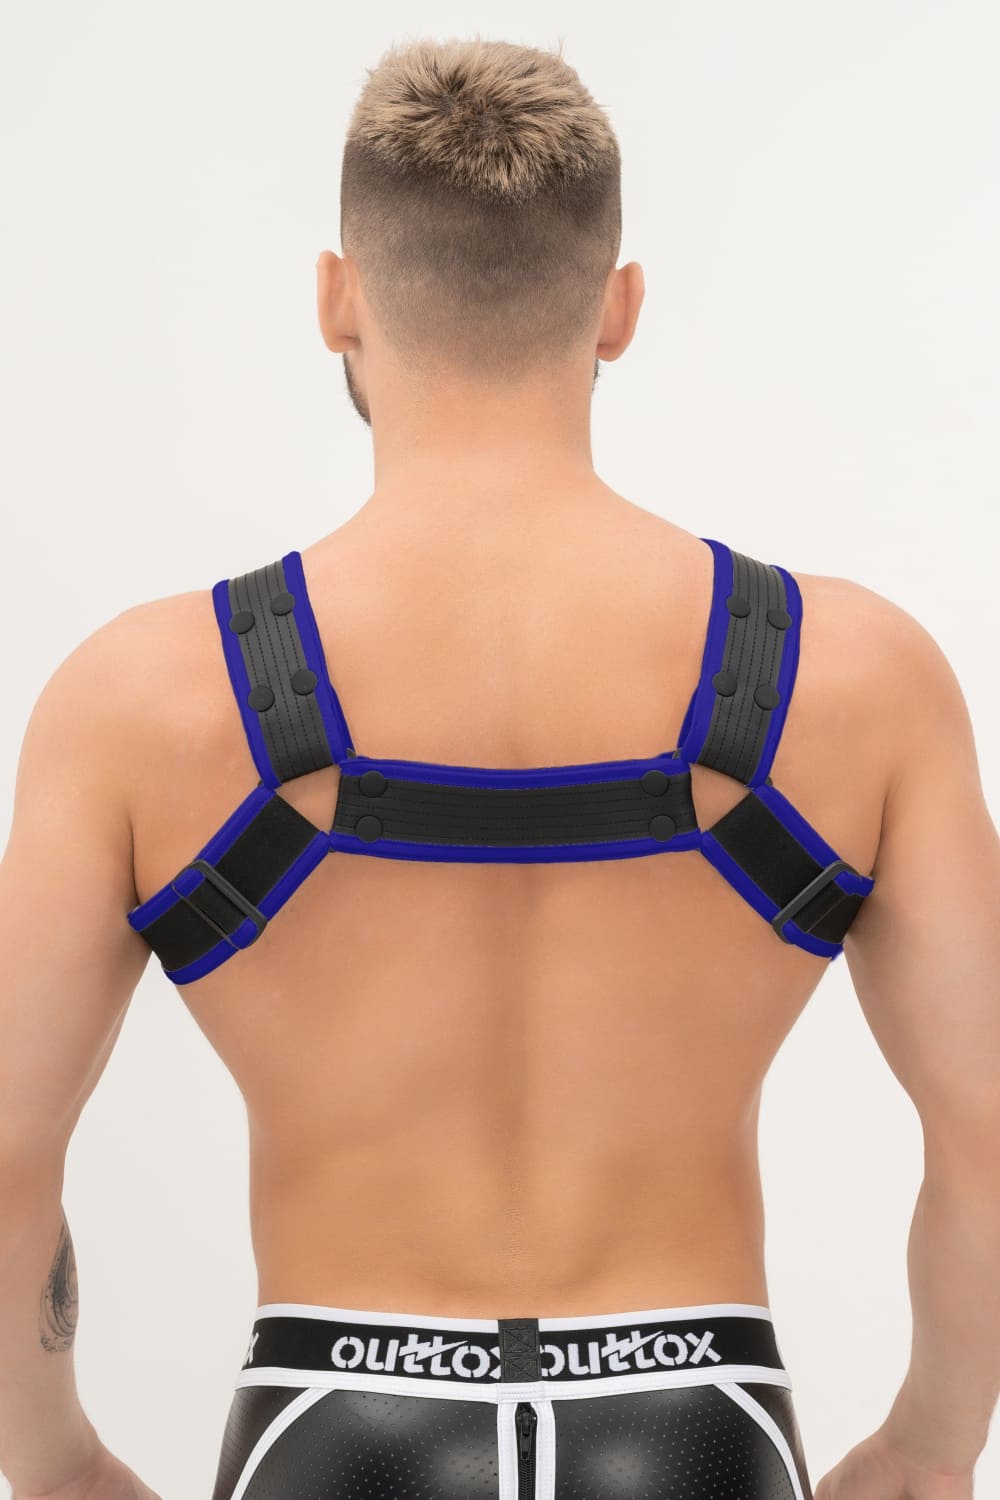 Outtox. Bulldog Harness with Snaps. Black+Blue 'Royal'